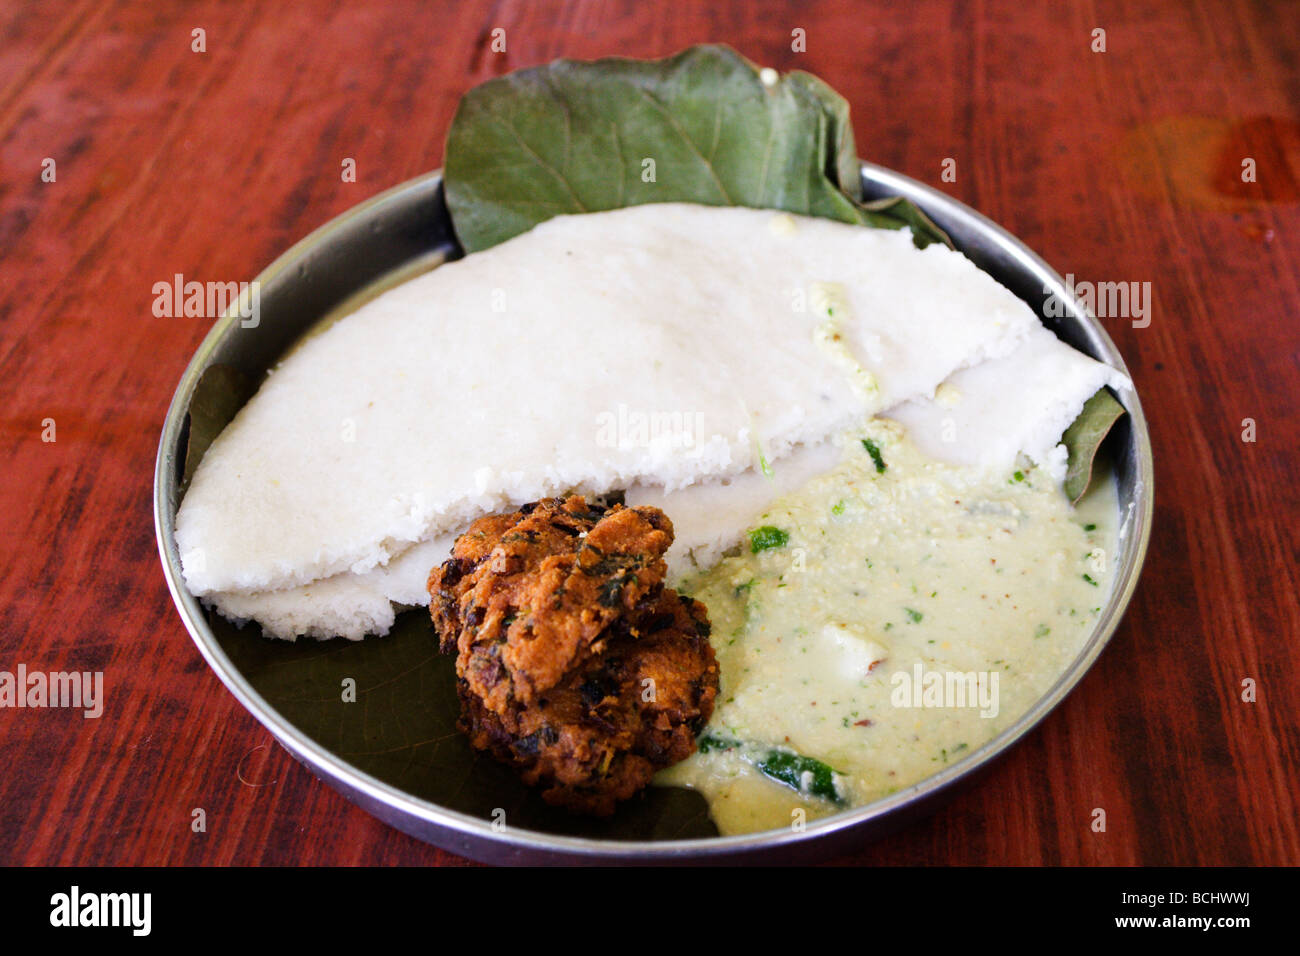 A traditional breakfast is served in an inexpensive restaurant in Mysore, India. Malliga Idly and Vada are served with chutney. Stock Photo